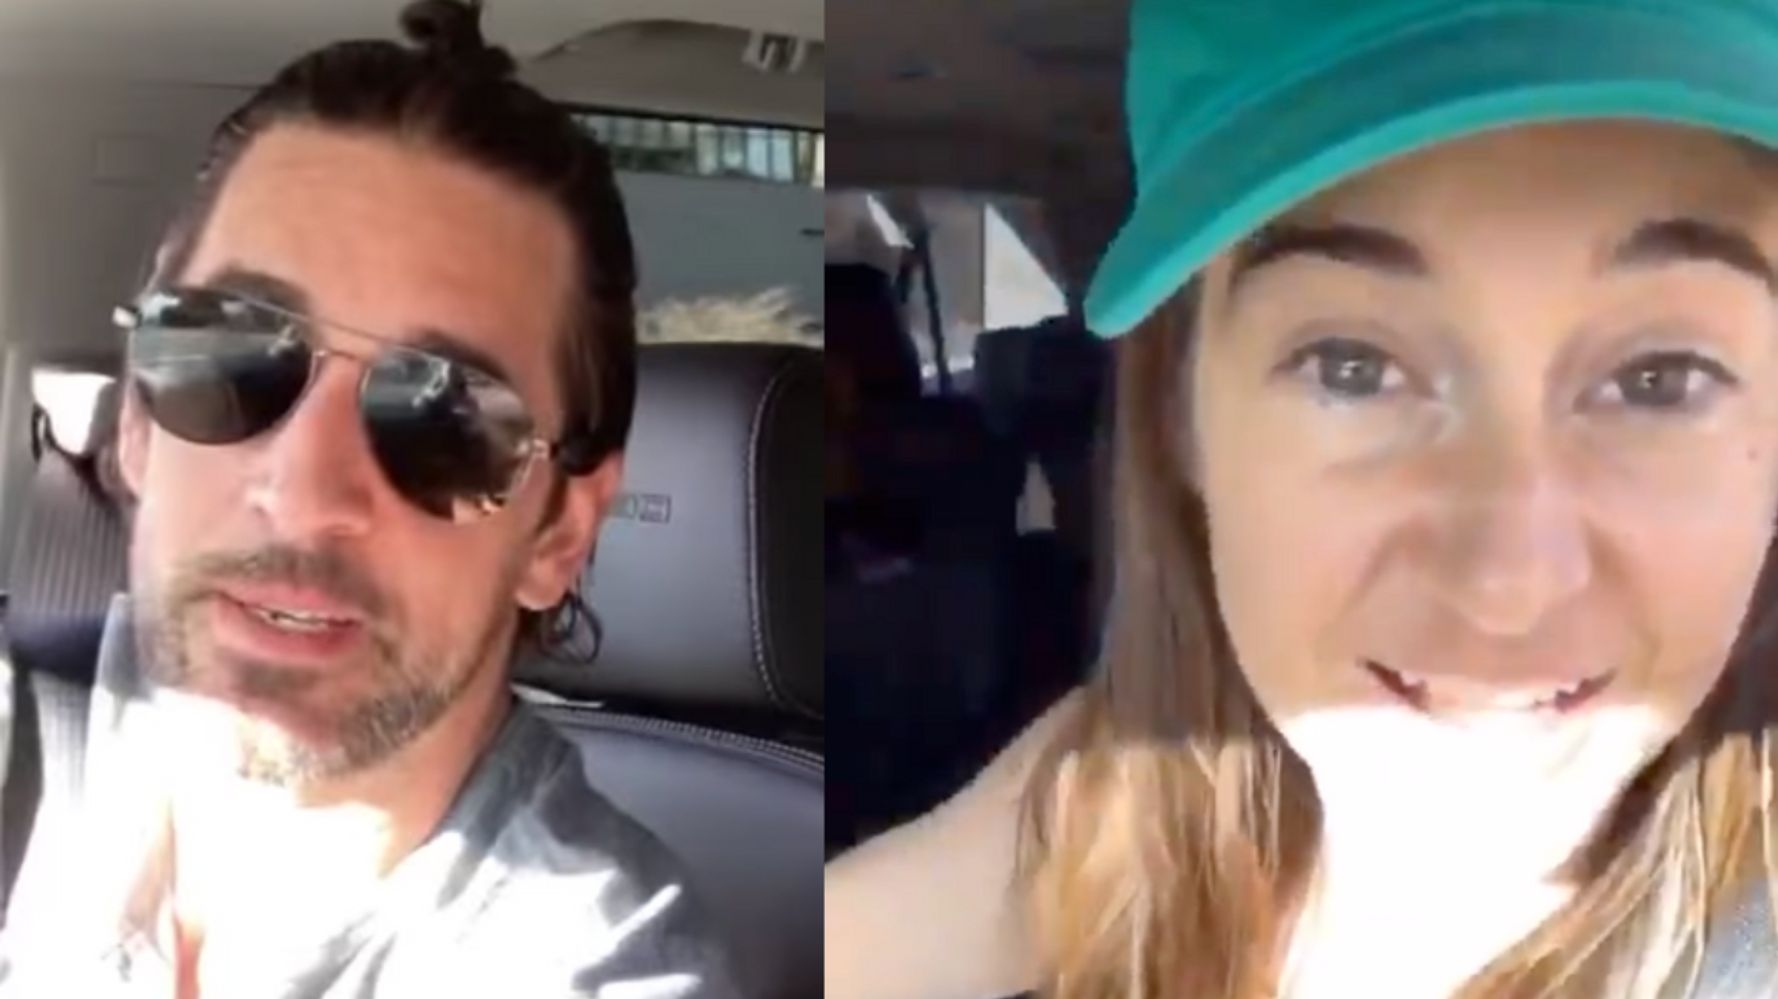 Shailene Woodley and Aaron Rodgers give fans a rare glimpse of their relationship